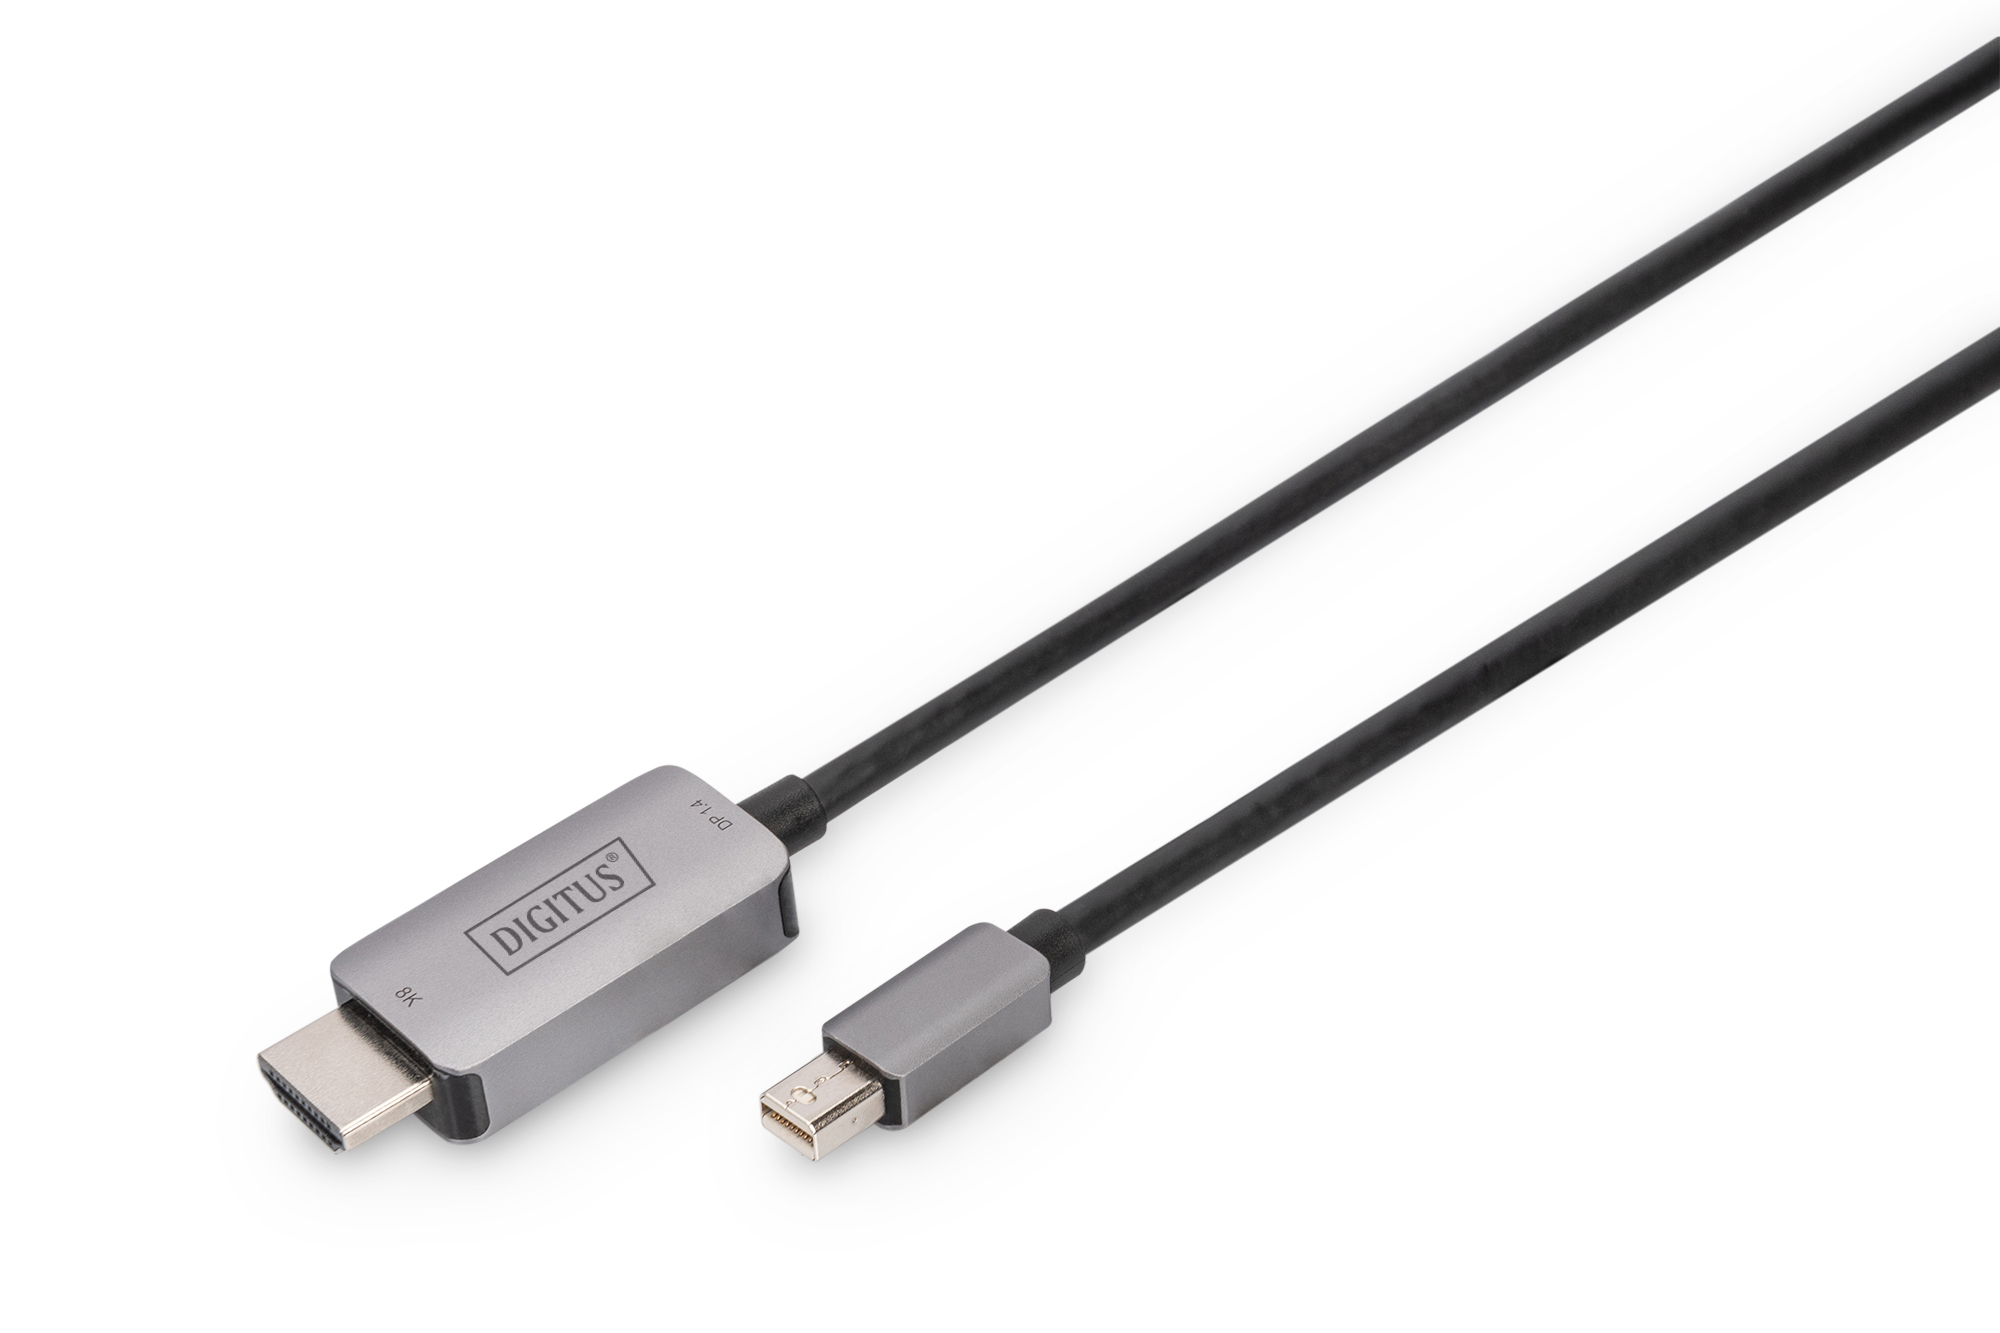 Active Mini DisplayPort (Thunderbolt) 1.4 / HDMI 8K Adapter Black - HDMI  Adapters - Video Adapters - Cables and Sockets